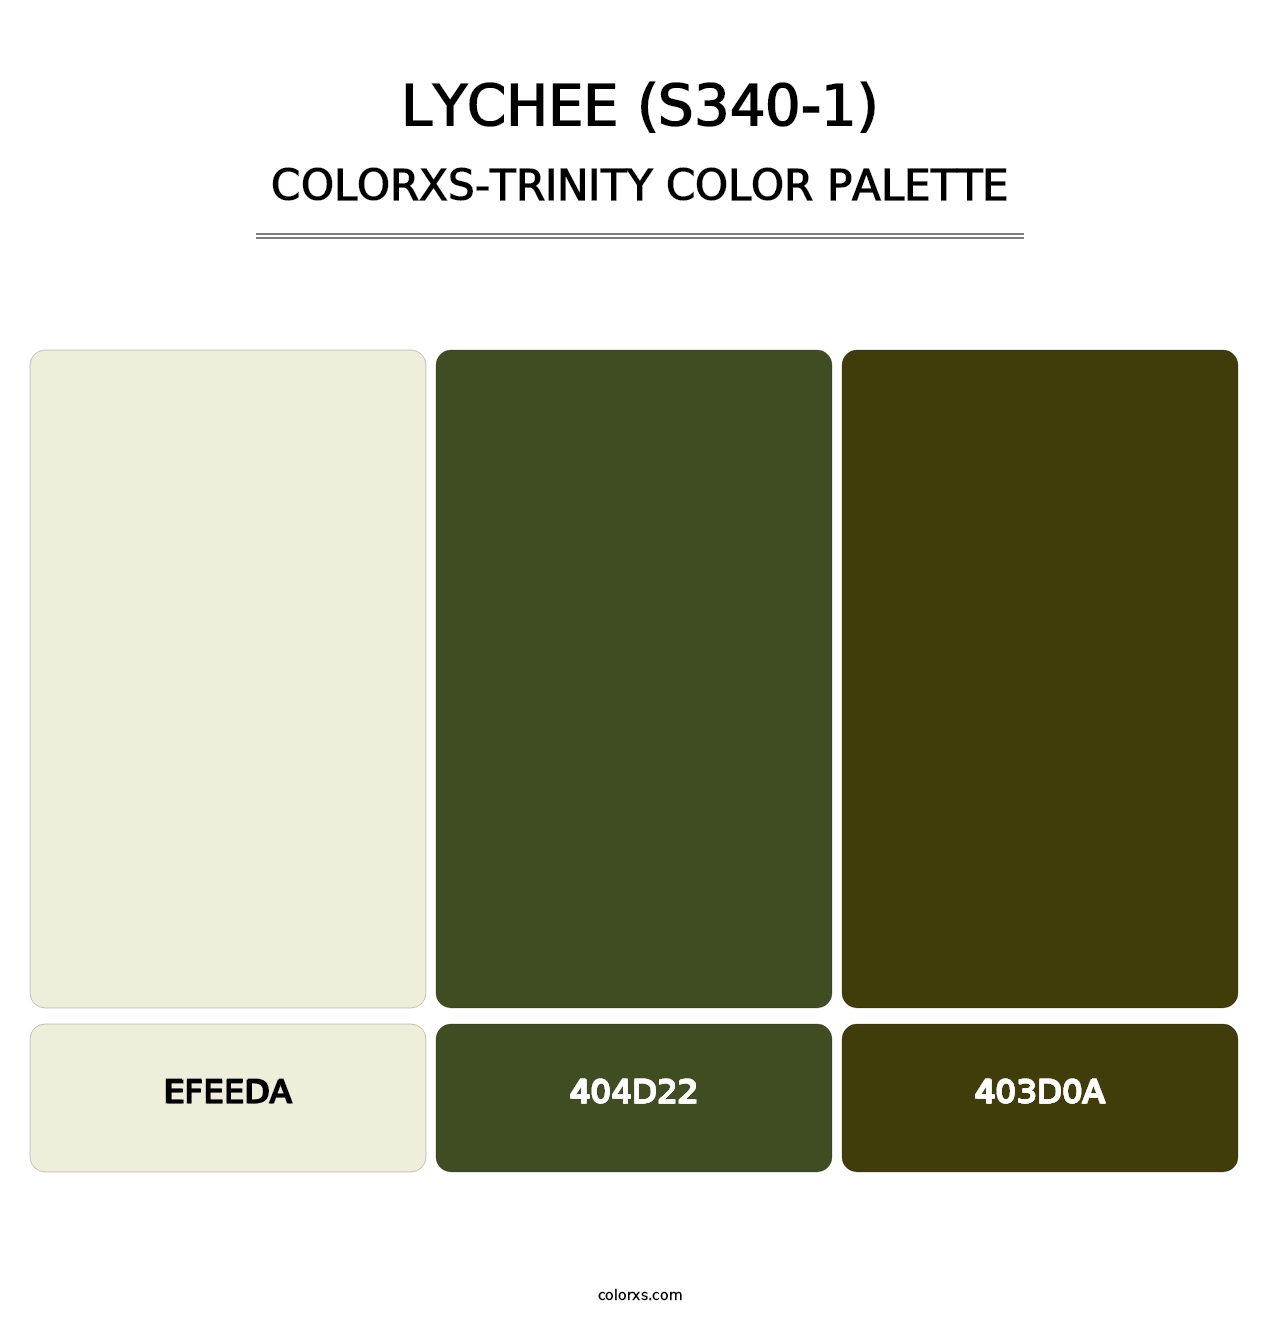 Lychee (S340-1) - Colorxs Trinity Palette